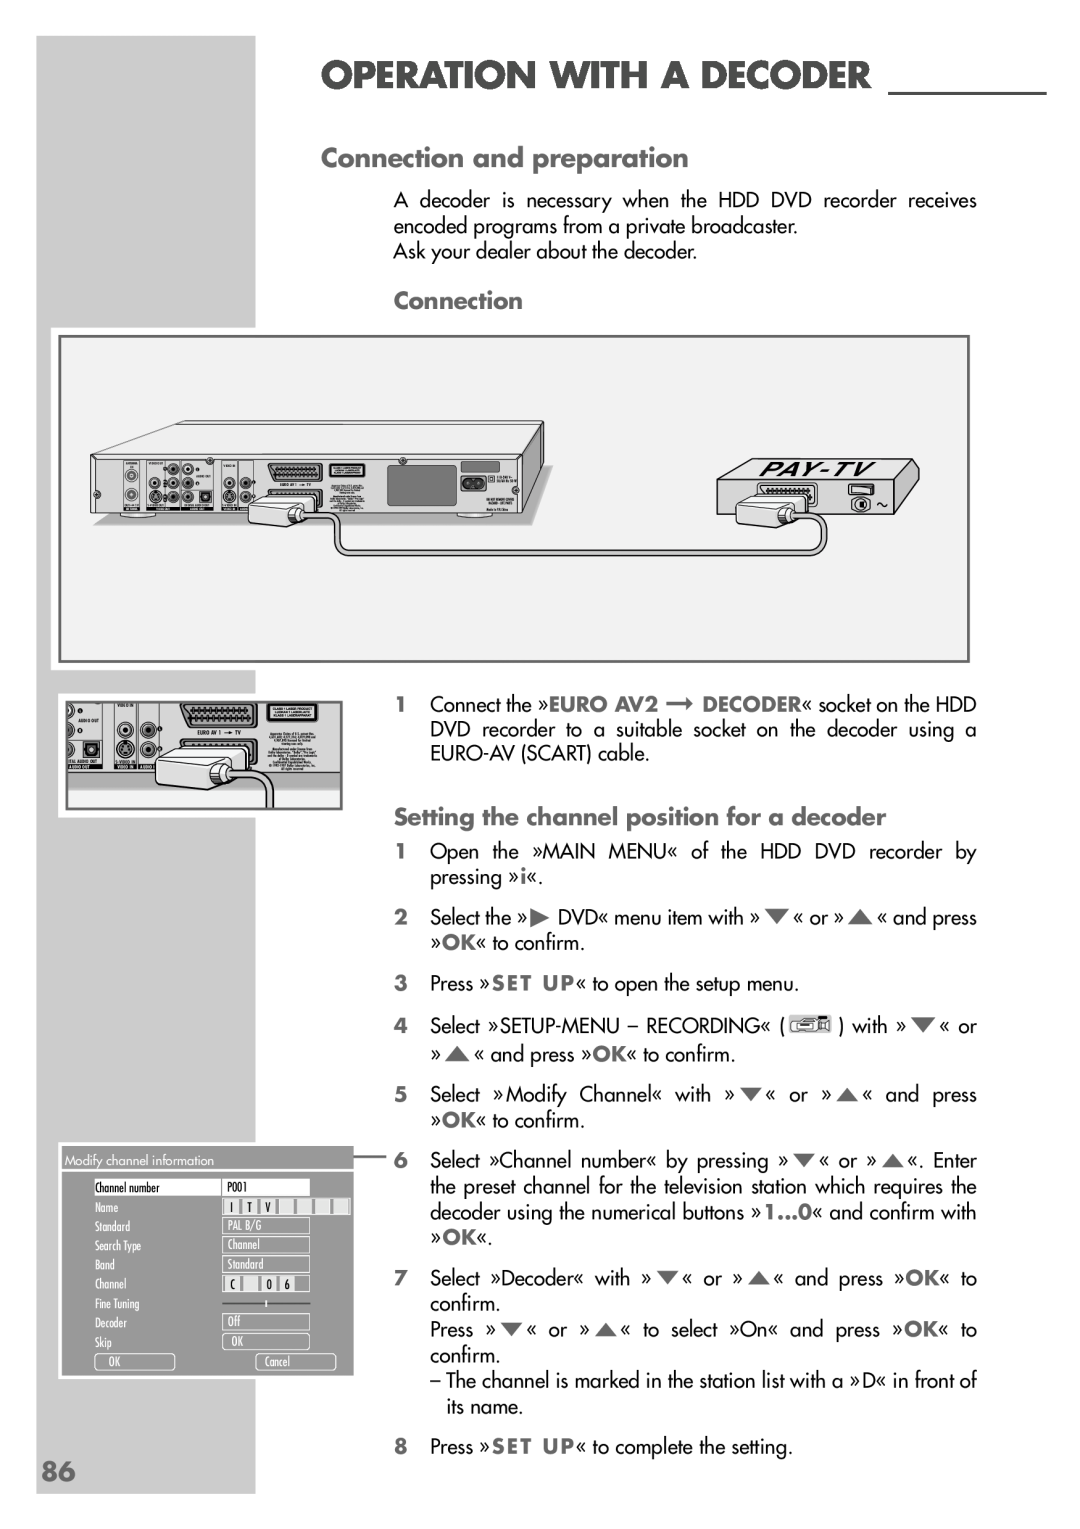 Grundig 5550 HDD manual Operation With A Decoder, Connection, Setting the channel position for a decoder 